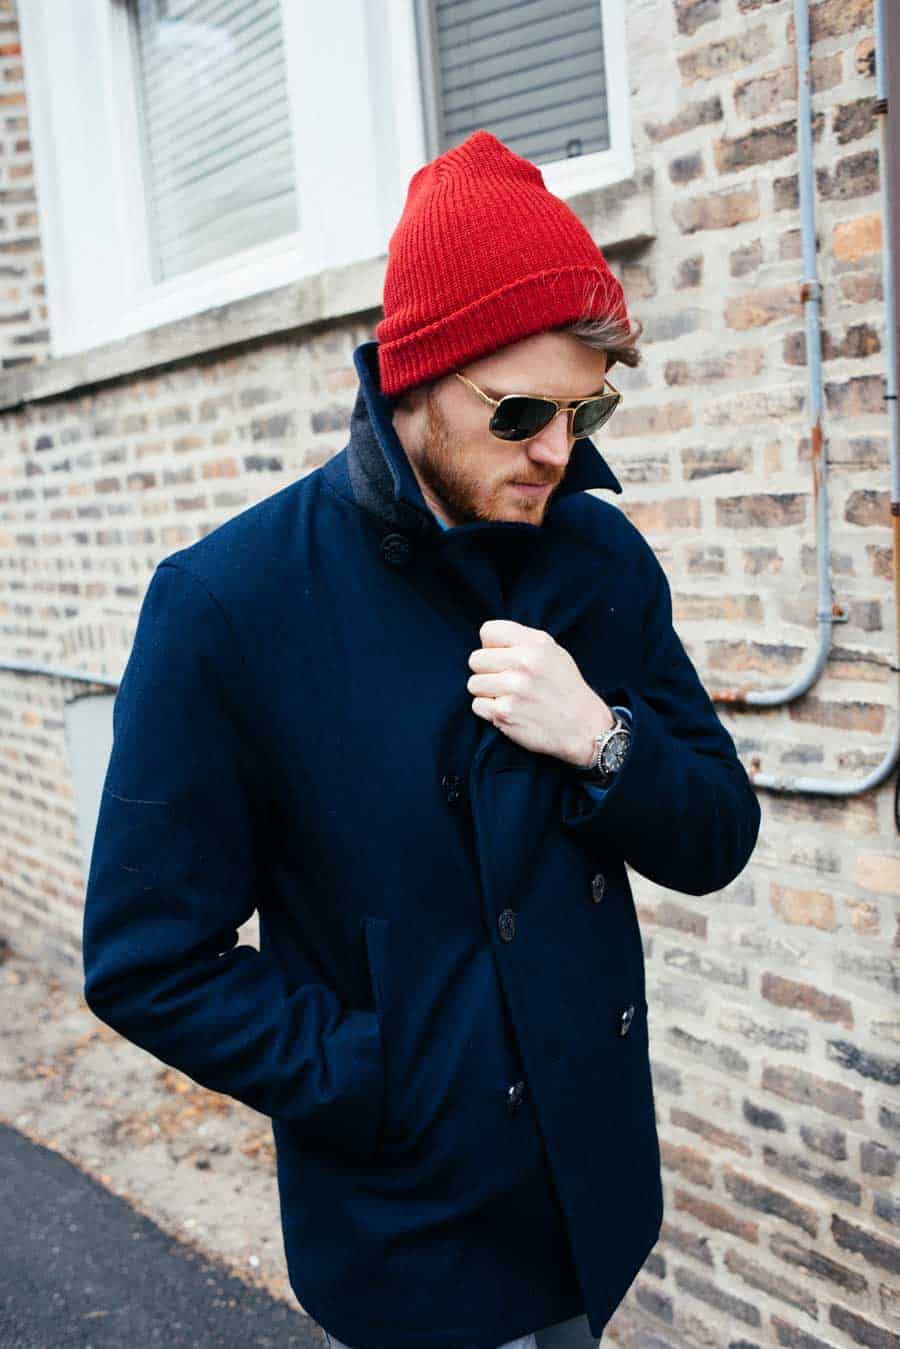 man wearing overcoat and hat inspired by The Life Aquatic movie